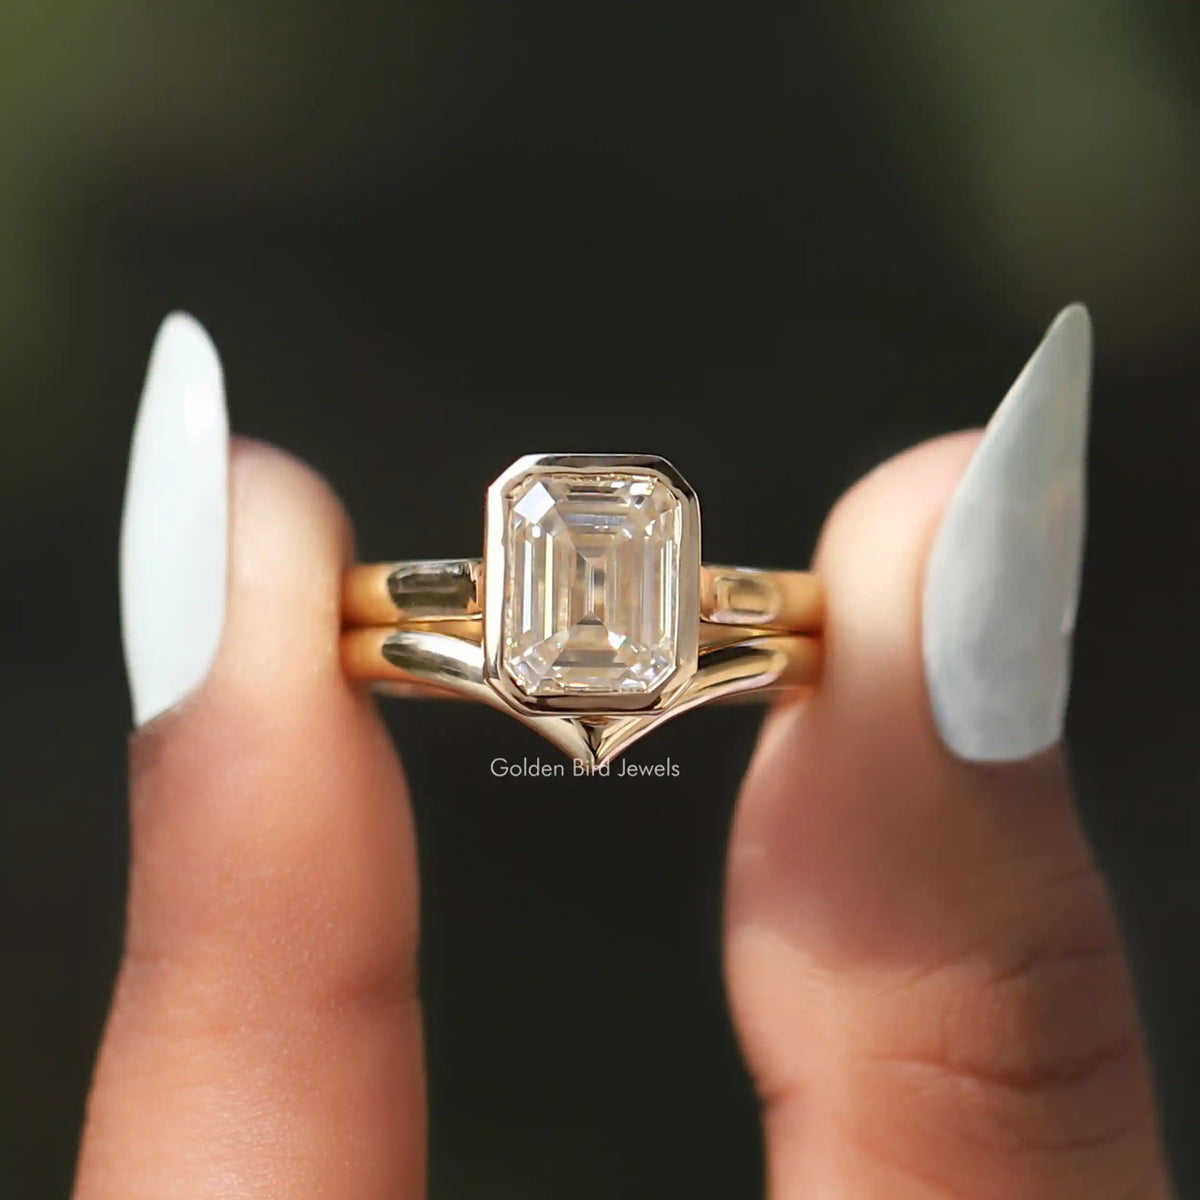 [In two finger front view of emerald cut moissanite solitaire bezel set ring]-[Golden Bird Jewels]